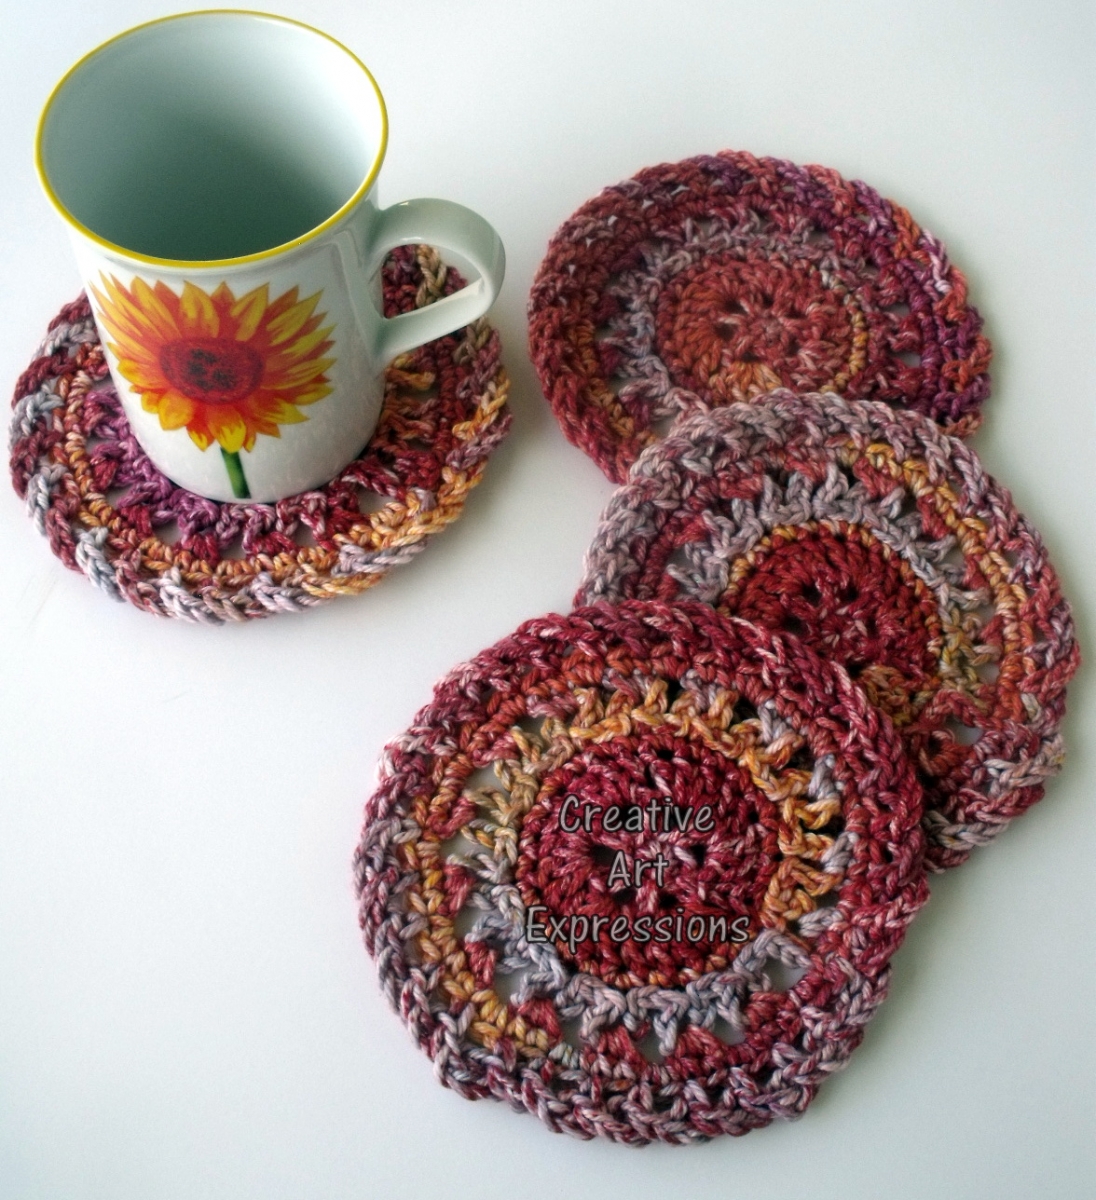 Harvest Crocheted Cotton Round Coasters